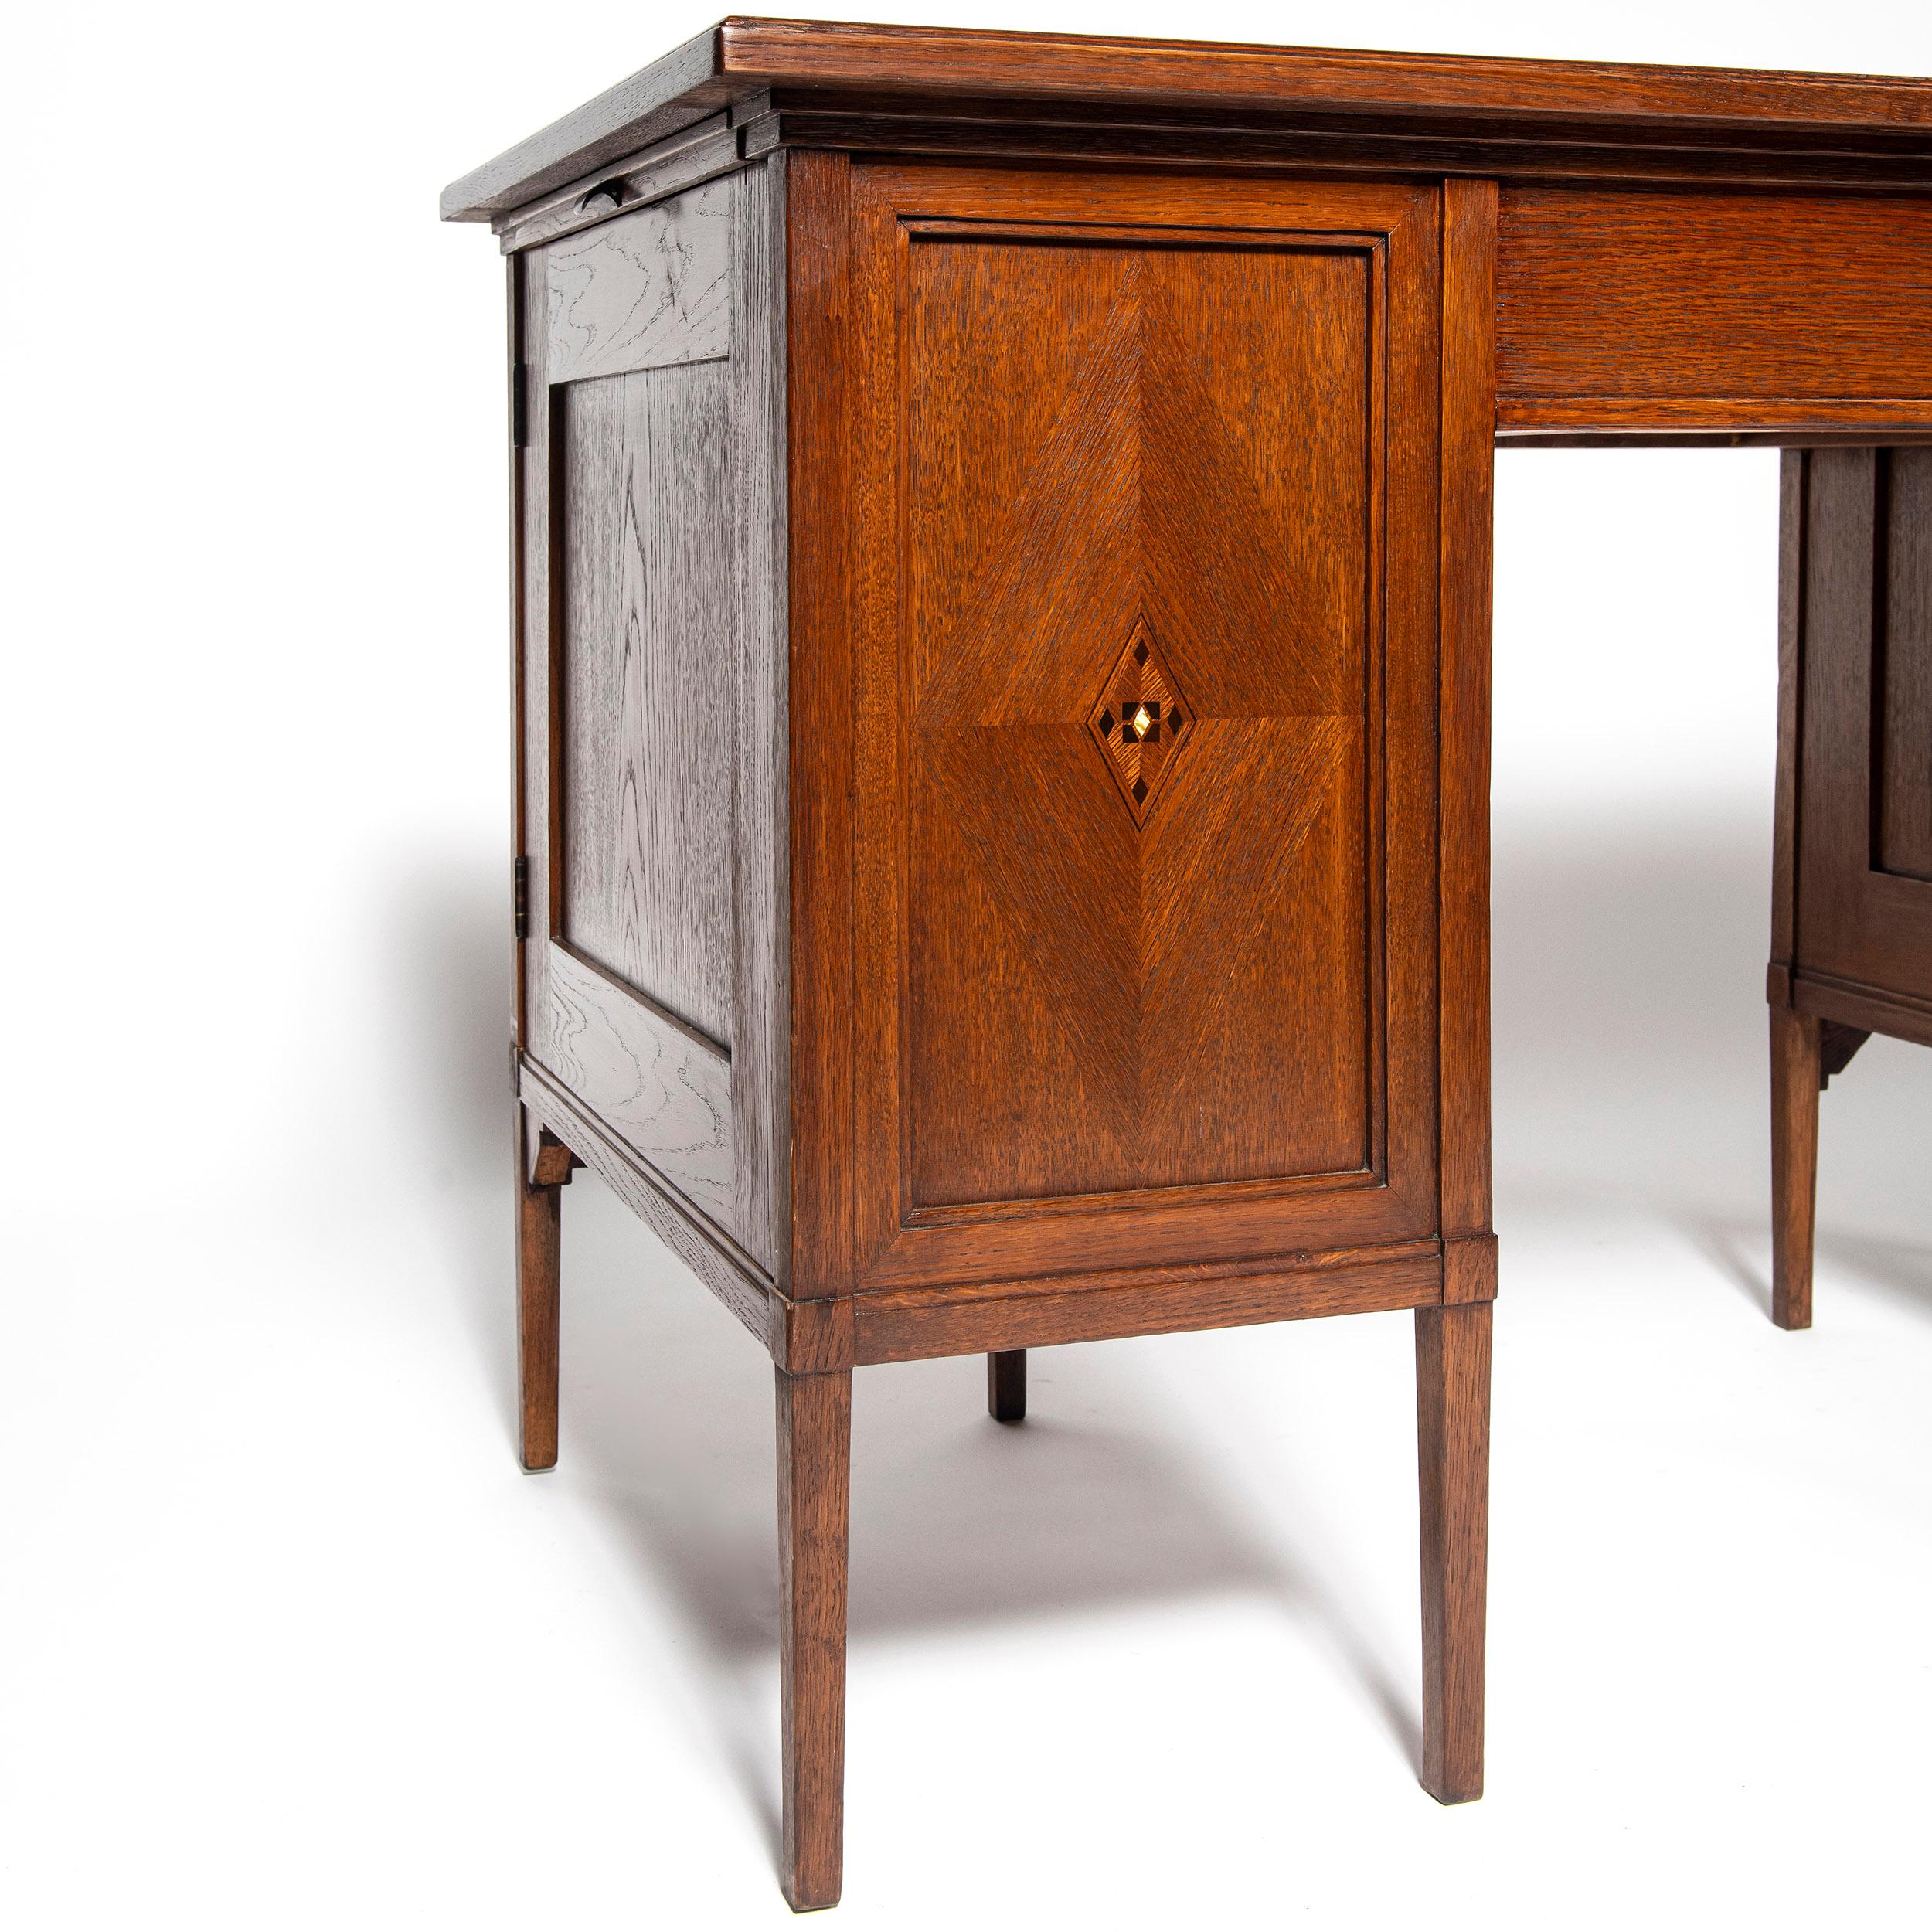 Marquetry Oak Wood, Iron and Leather Desk, Scotland, Early 20th Century